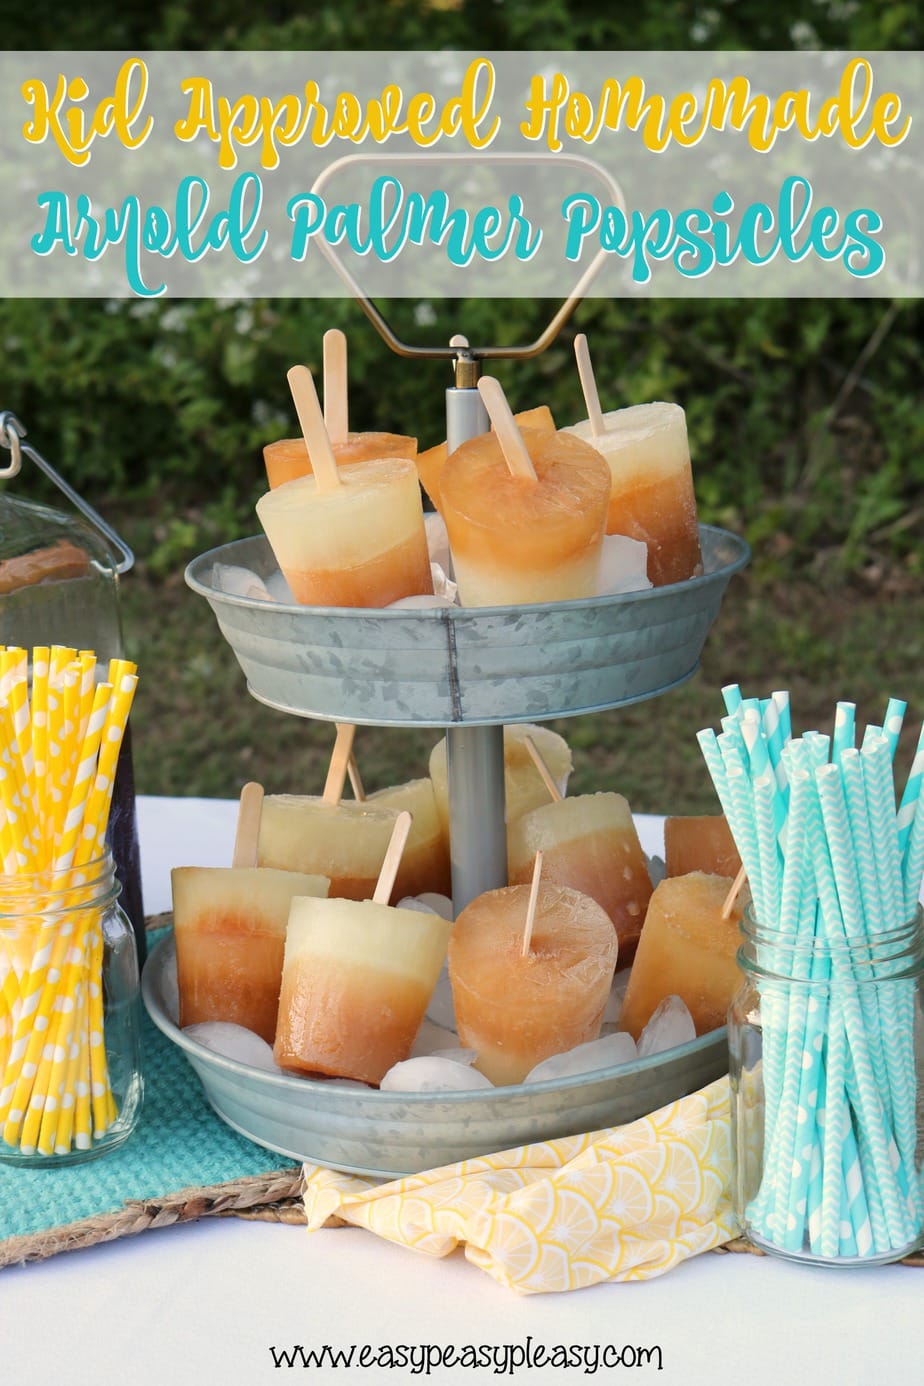 Looking for a kid approved homemade popsicle Check out these super easy Arnold Palmer Popsicles. Lemonade and tea make the best combo.